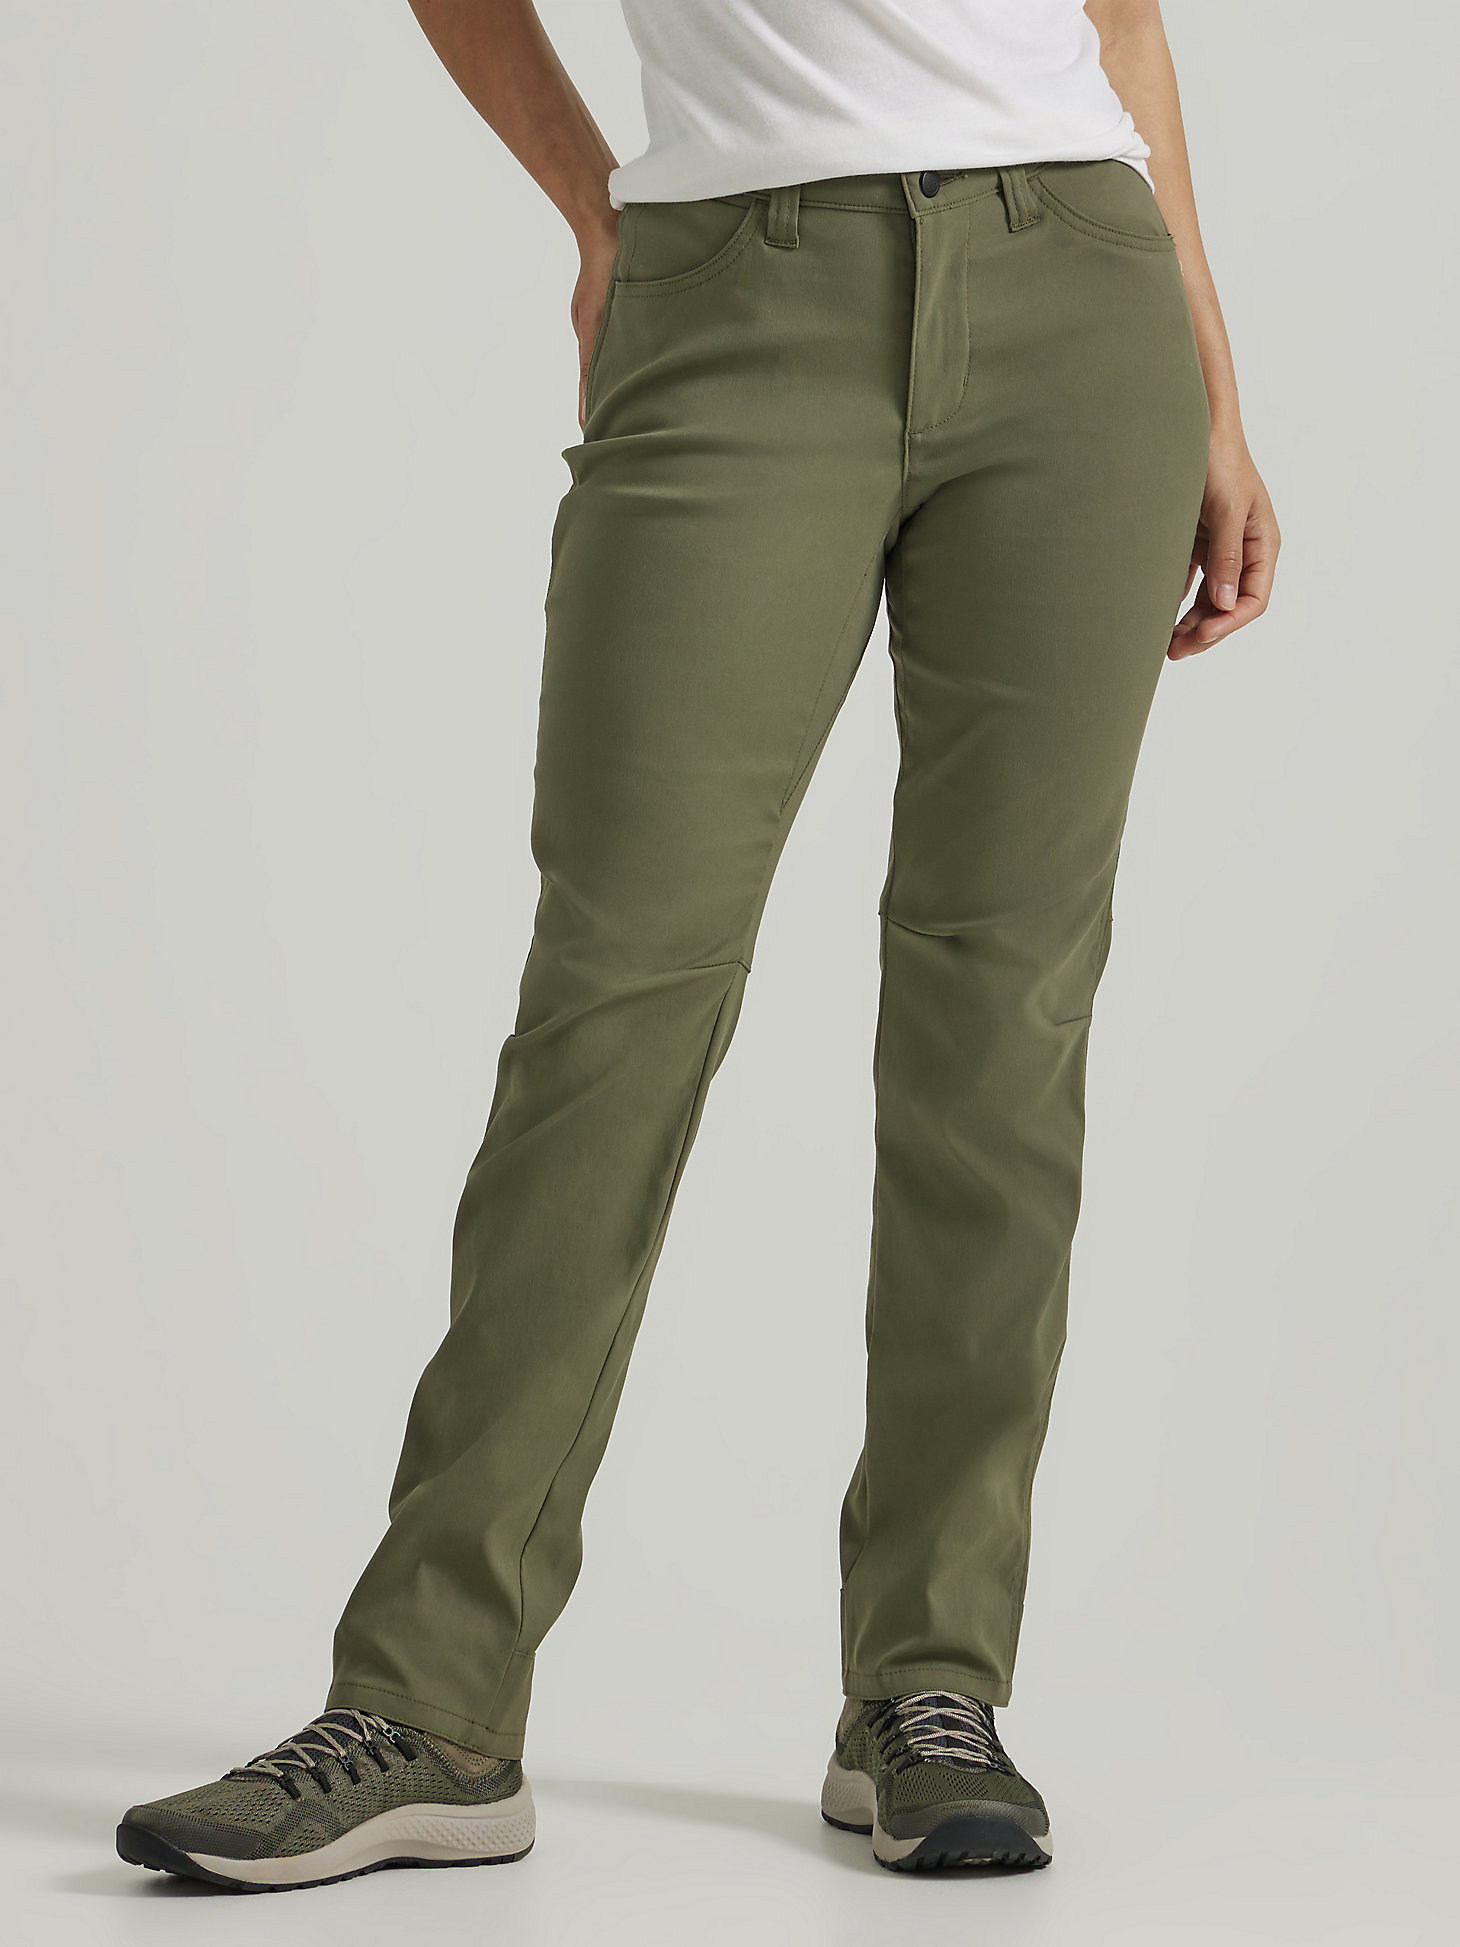 ATG by Wrangler™ Women's Slim Utility Pant in Dusty Olive